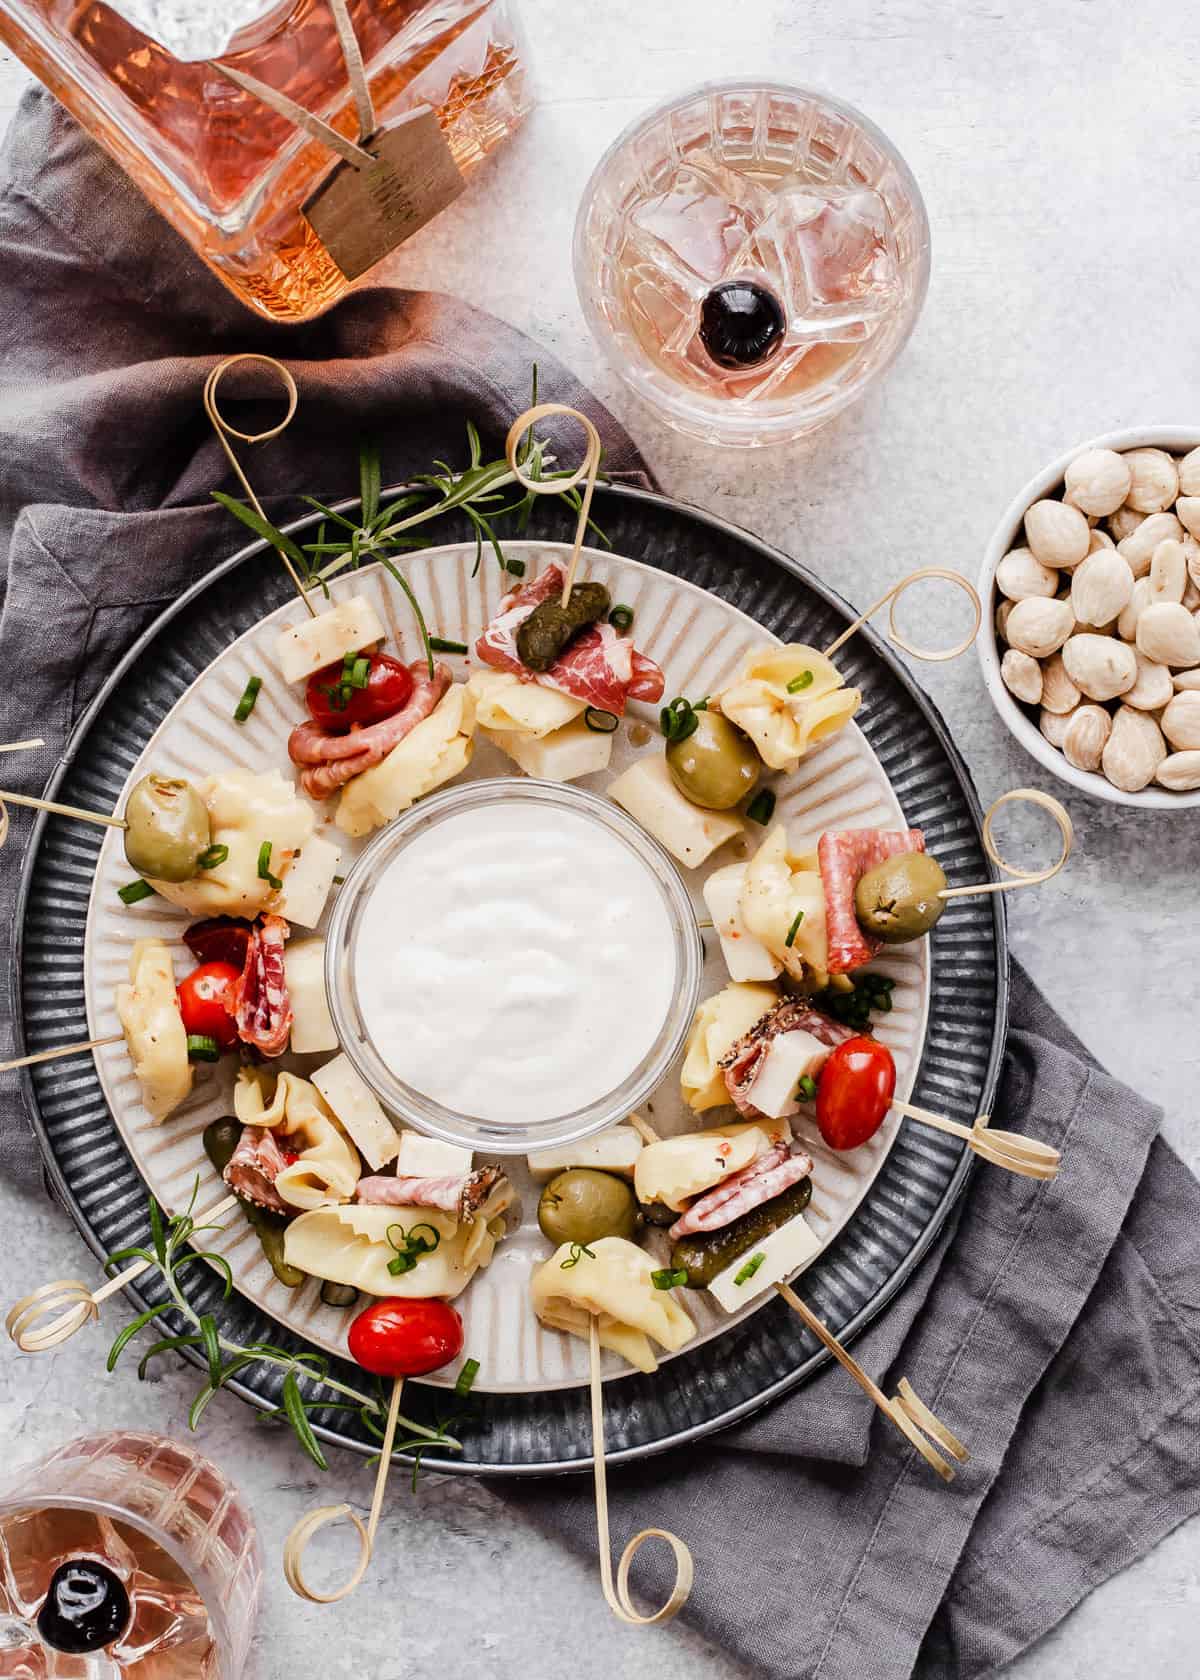 round dish of skewered appetizers with tortellini, cured meats, pickles, tomatoes and olives, surrounded by drinks.